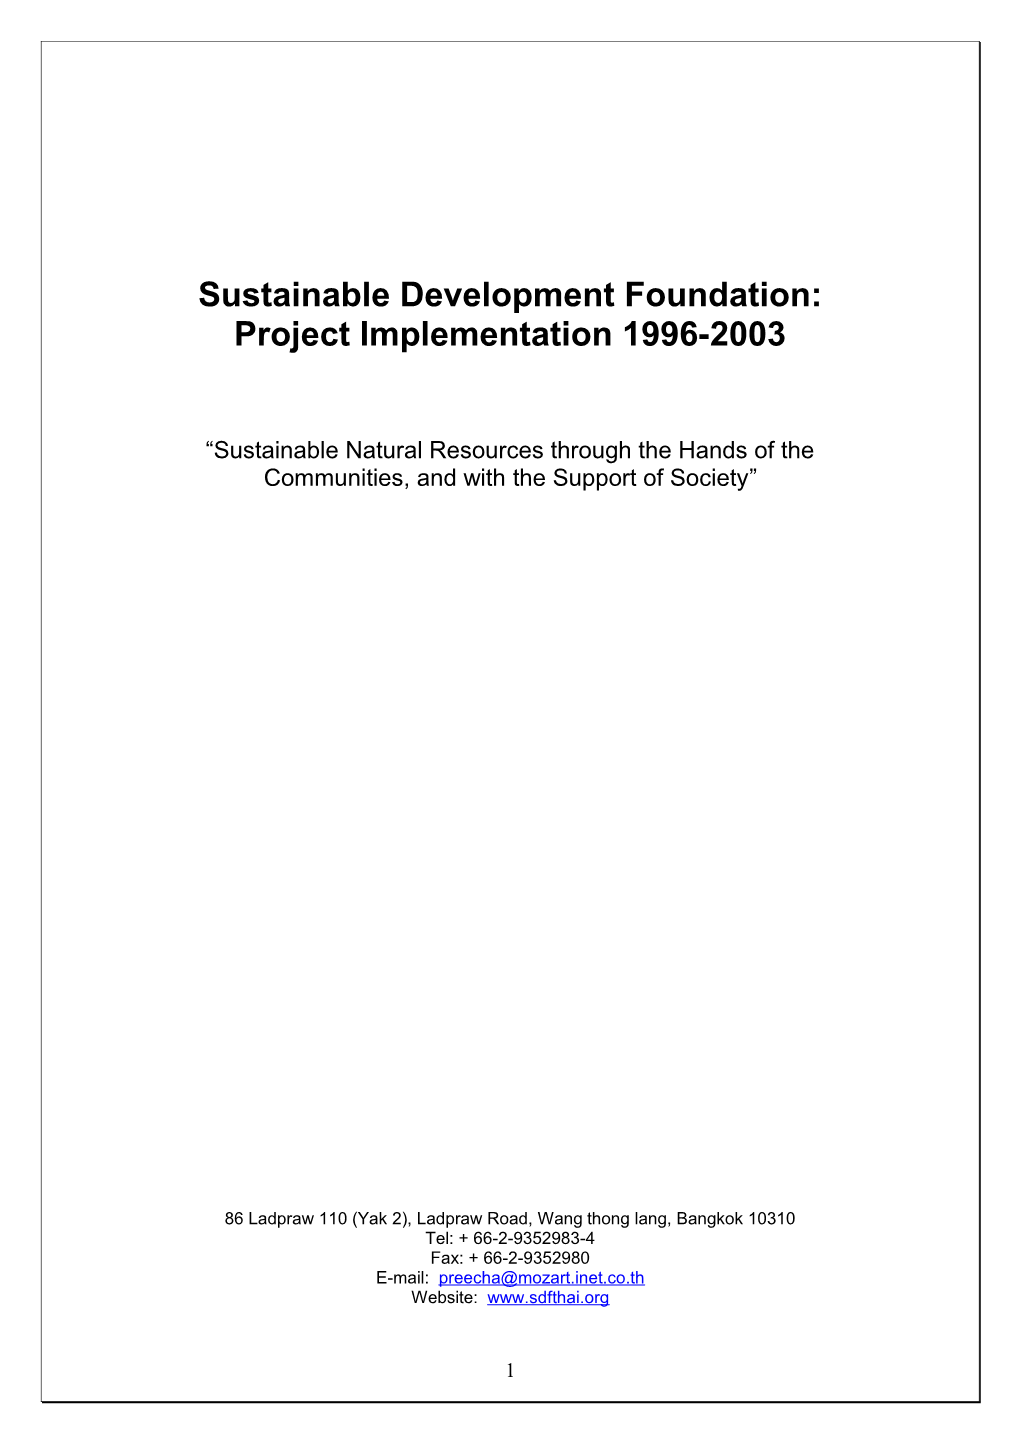 Issues and Problems in Natural Resources Management in Thailand